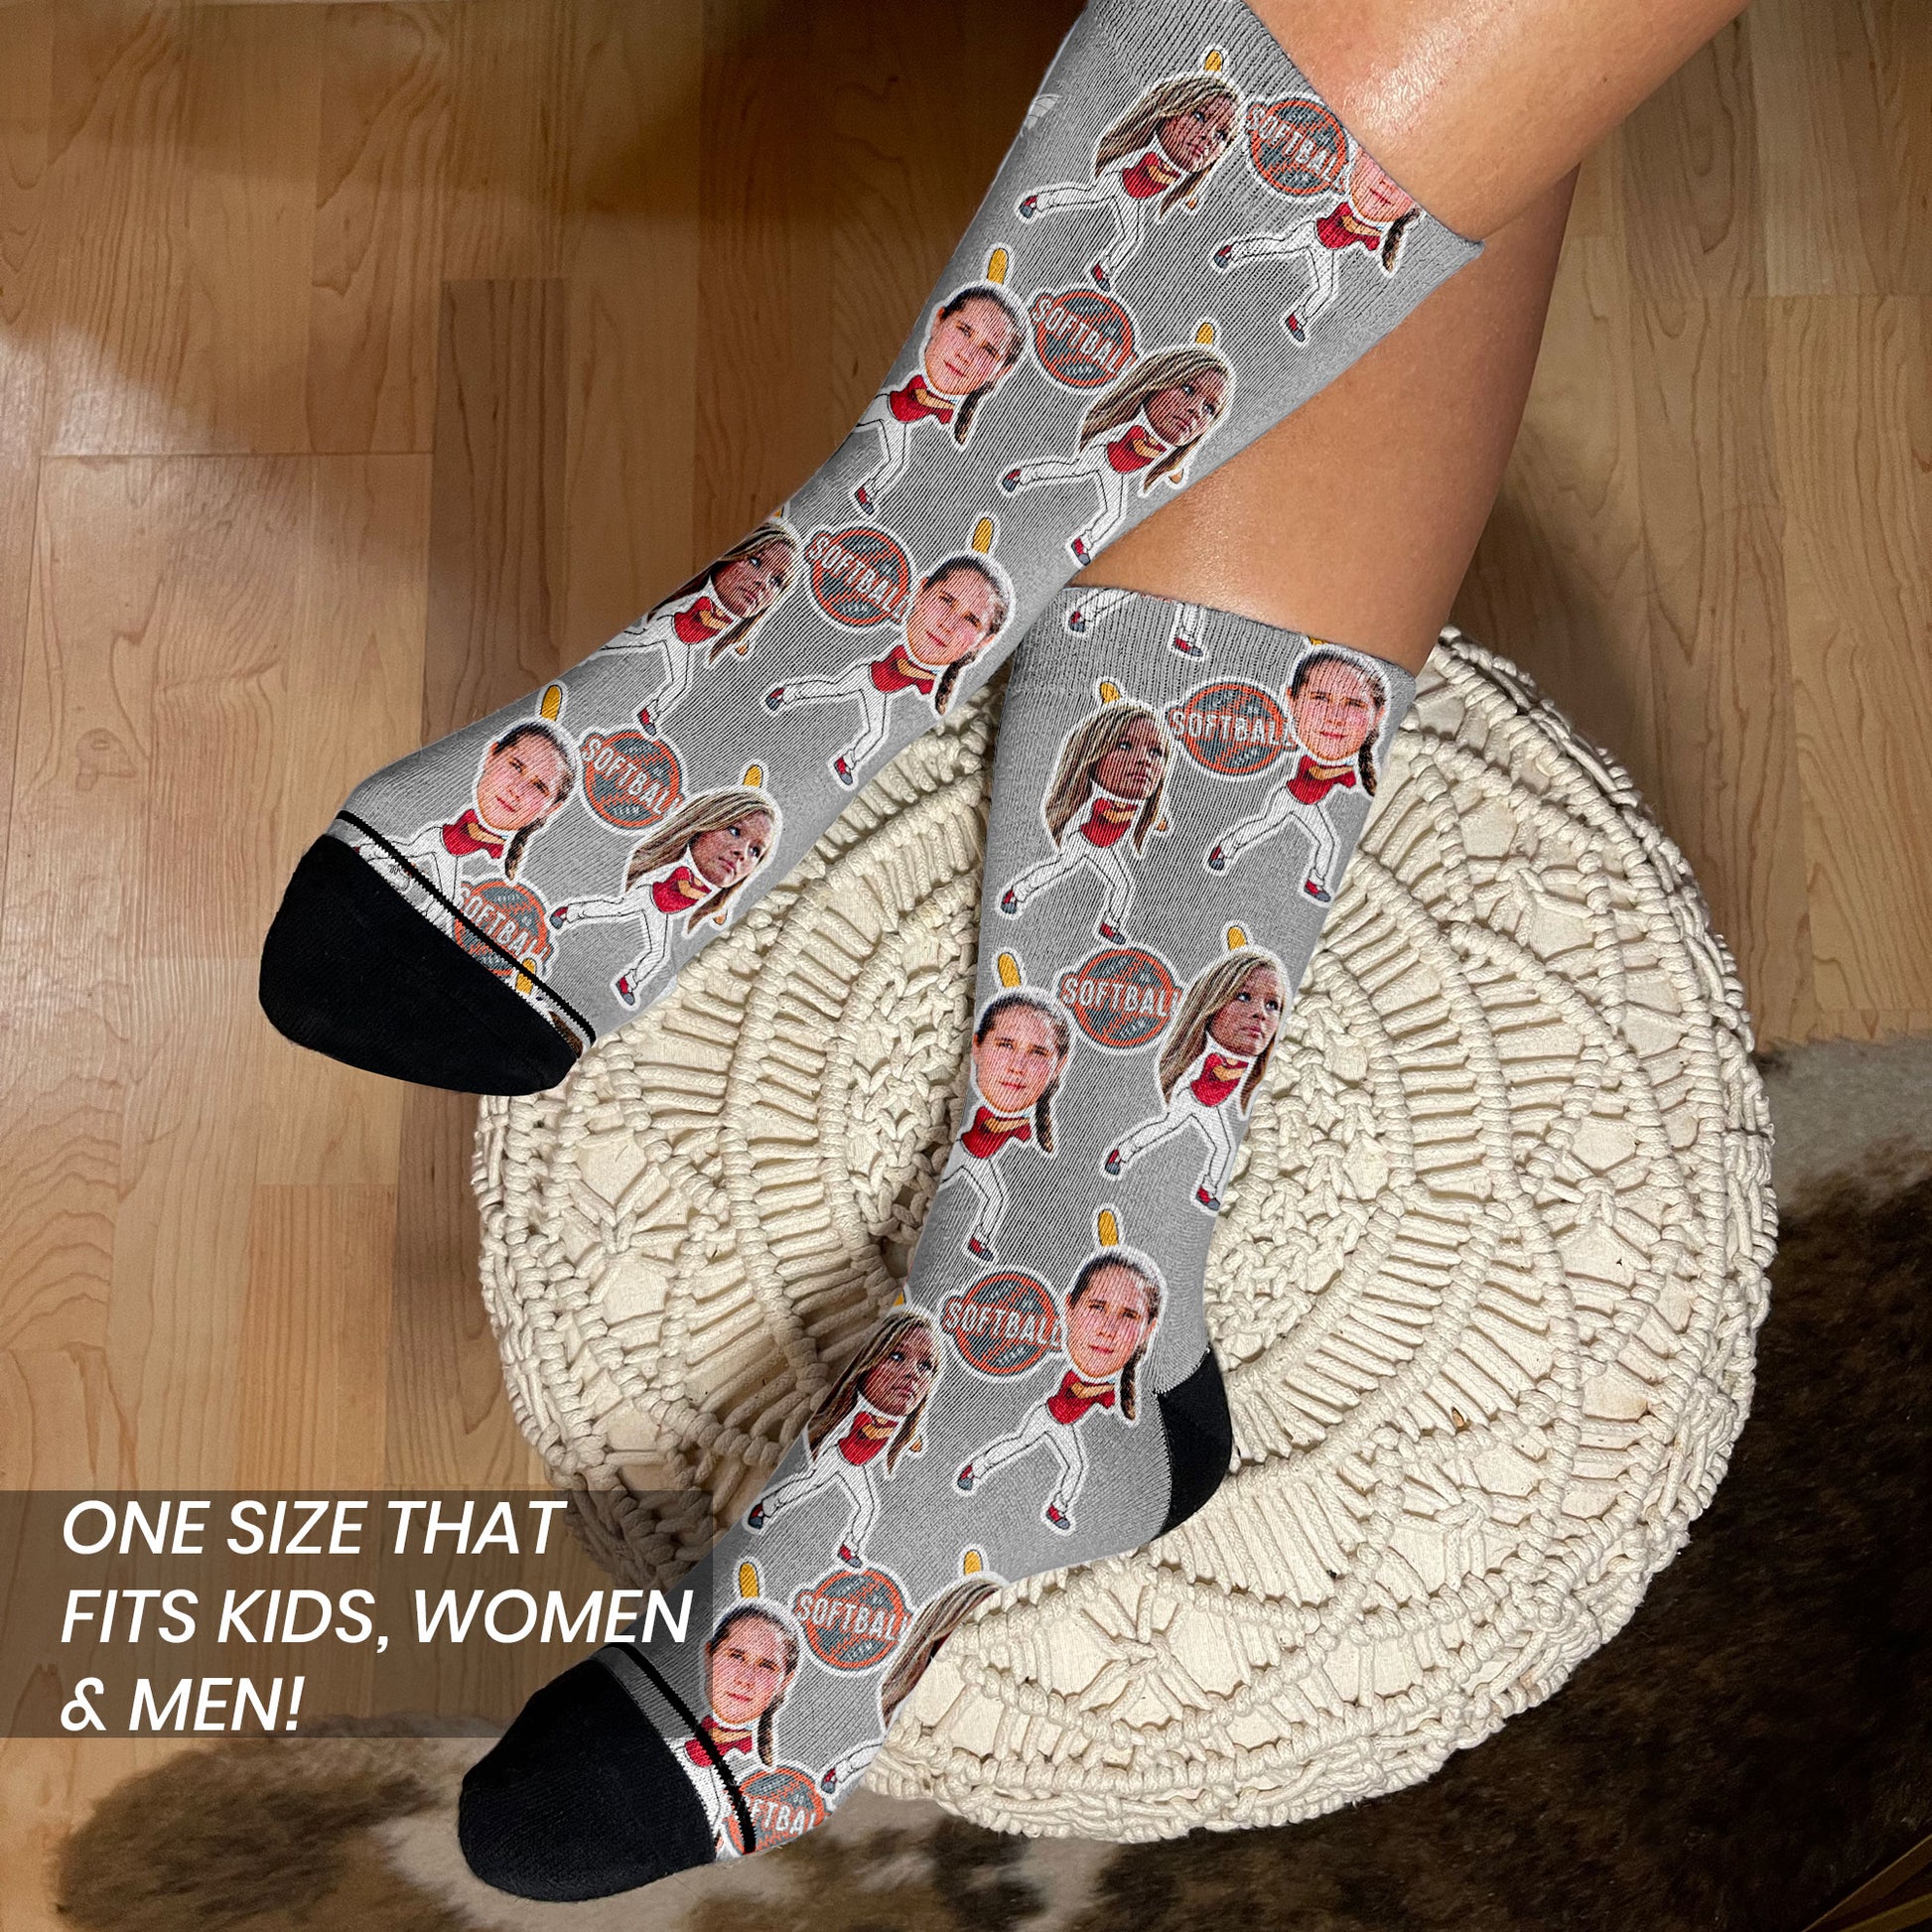 personalized softball socks with real photos on cartoon bodies on women's feet